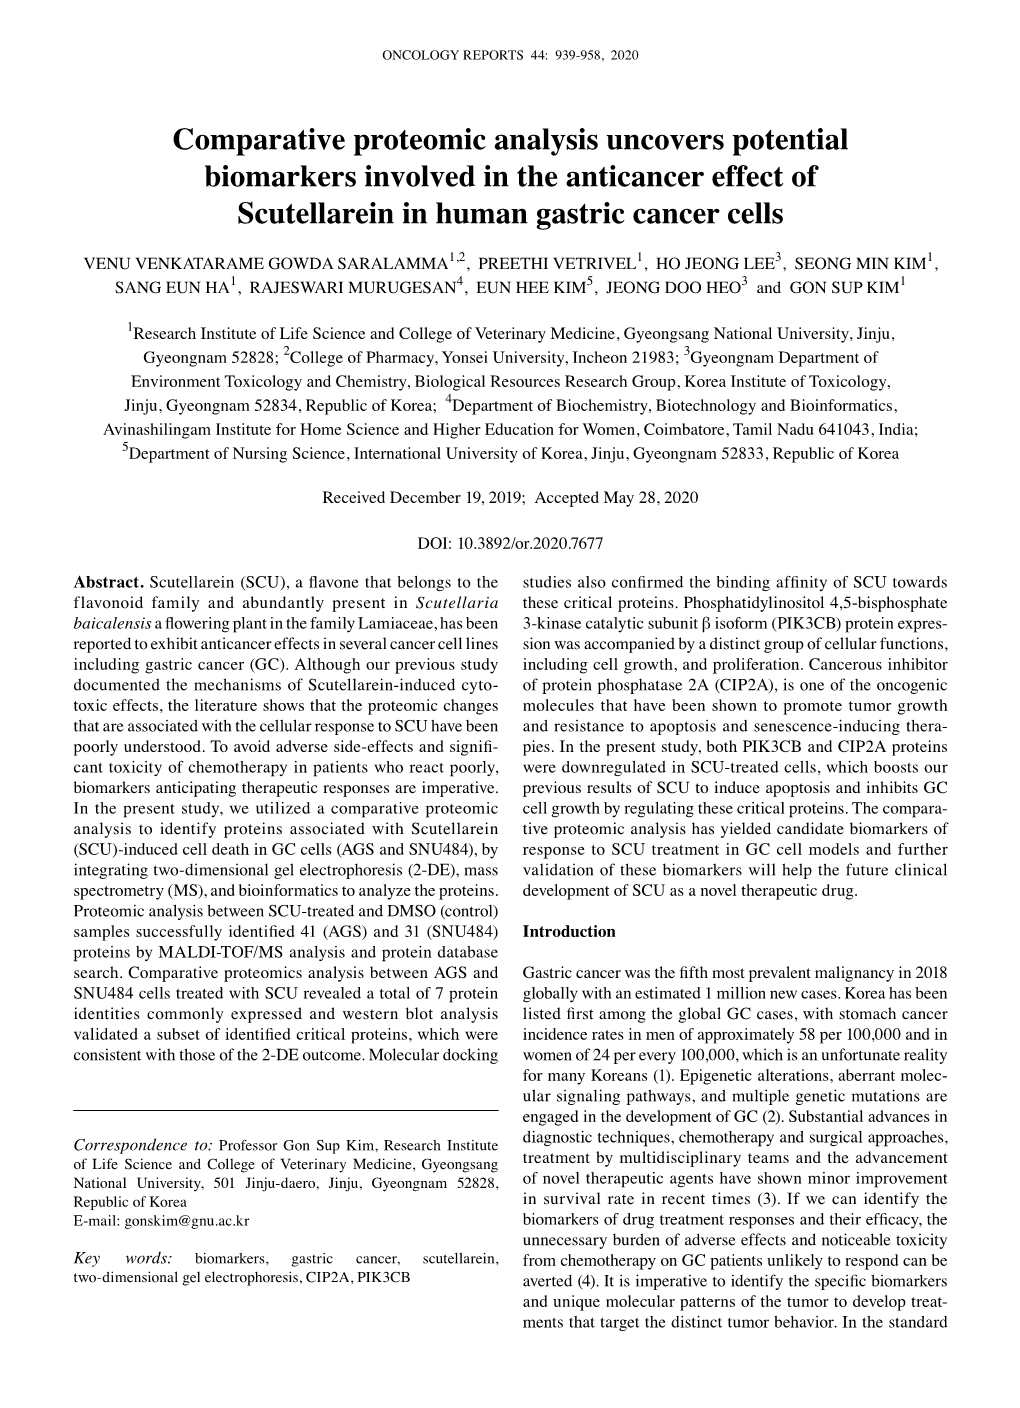 Comparative Proteomic Analysis Uncovers Potential Biomarkers Involved in the Anticancer Effect of Scutellarein in Human Gastric Cancer Cells